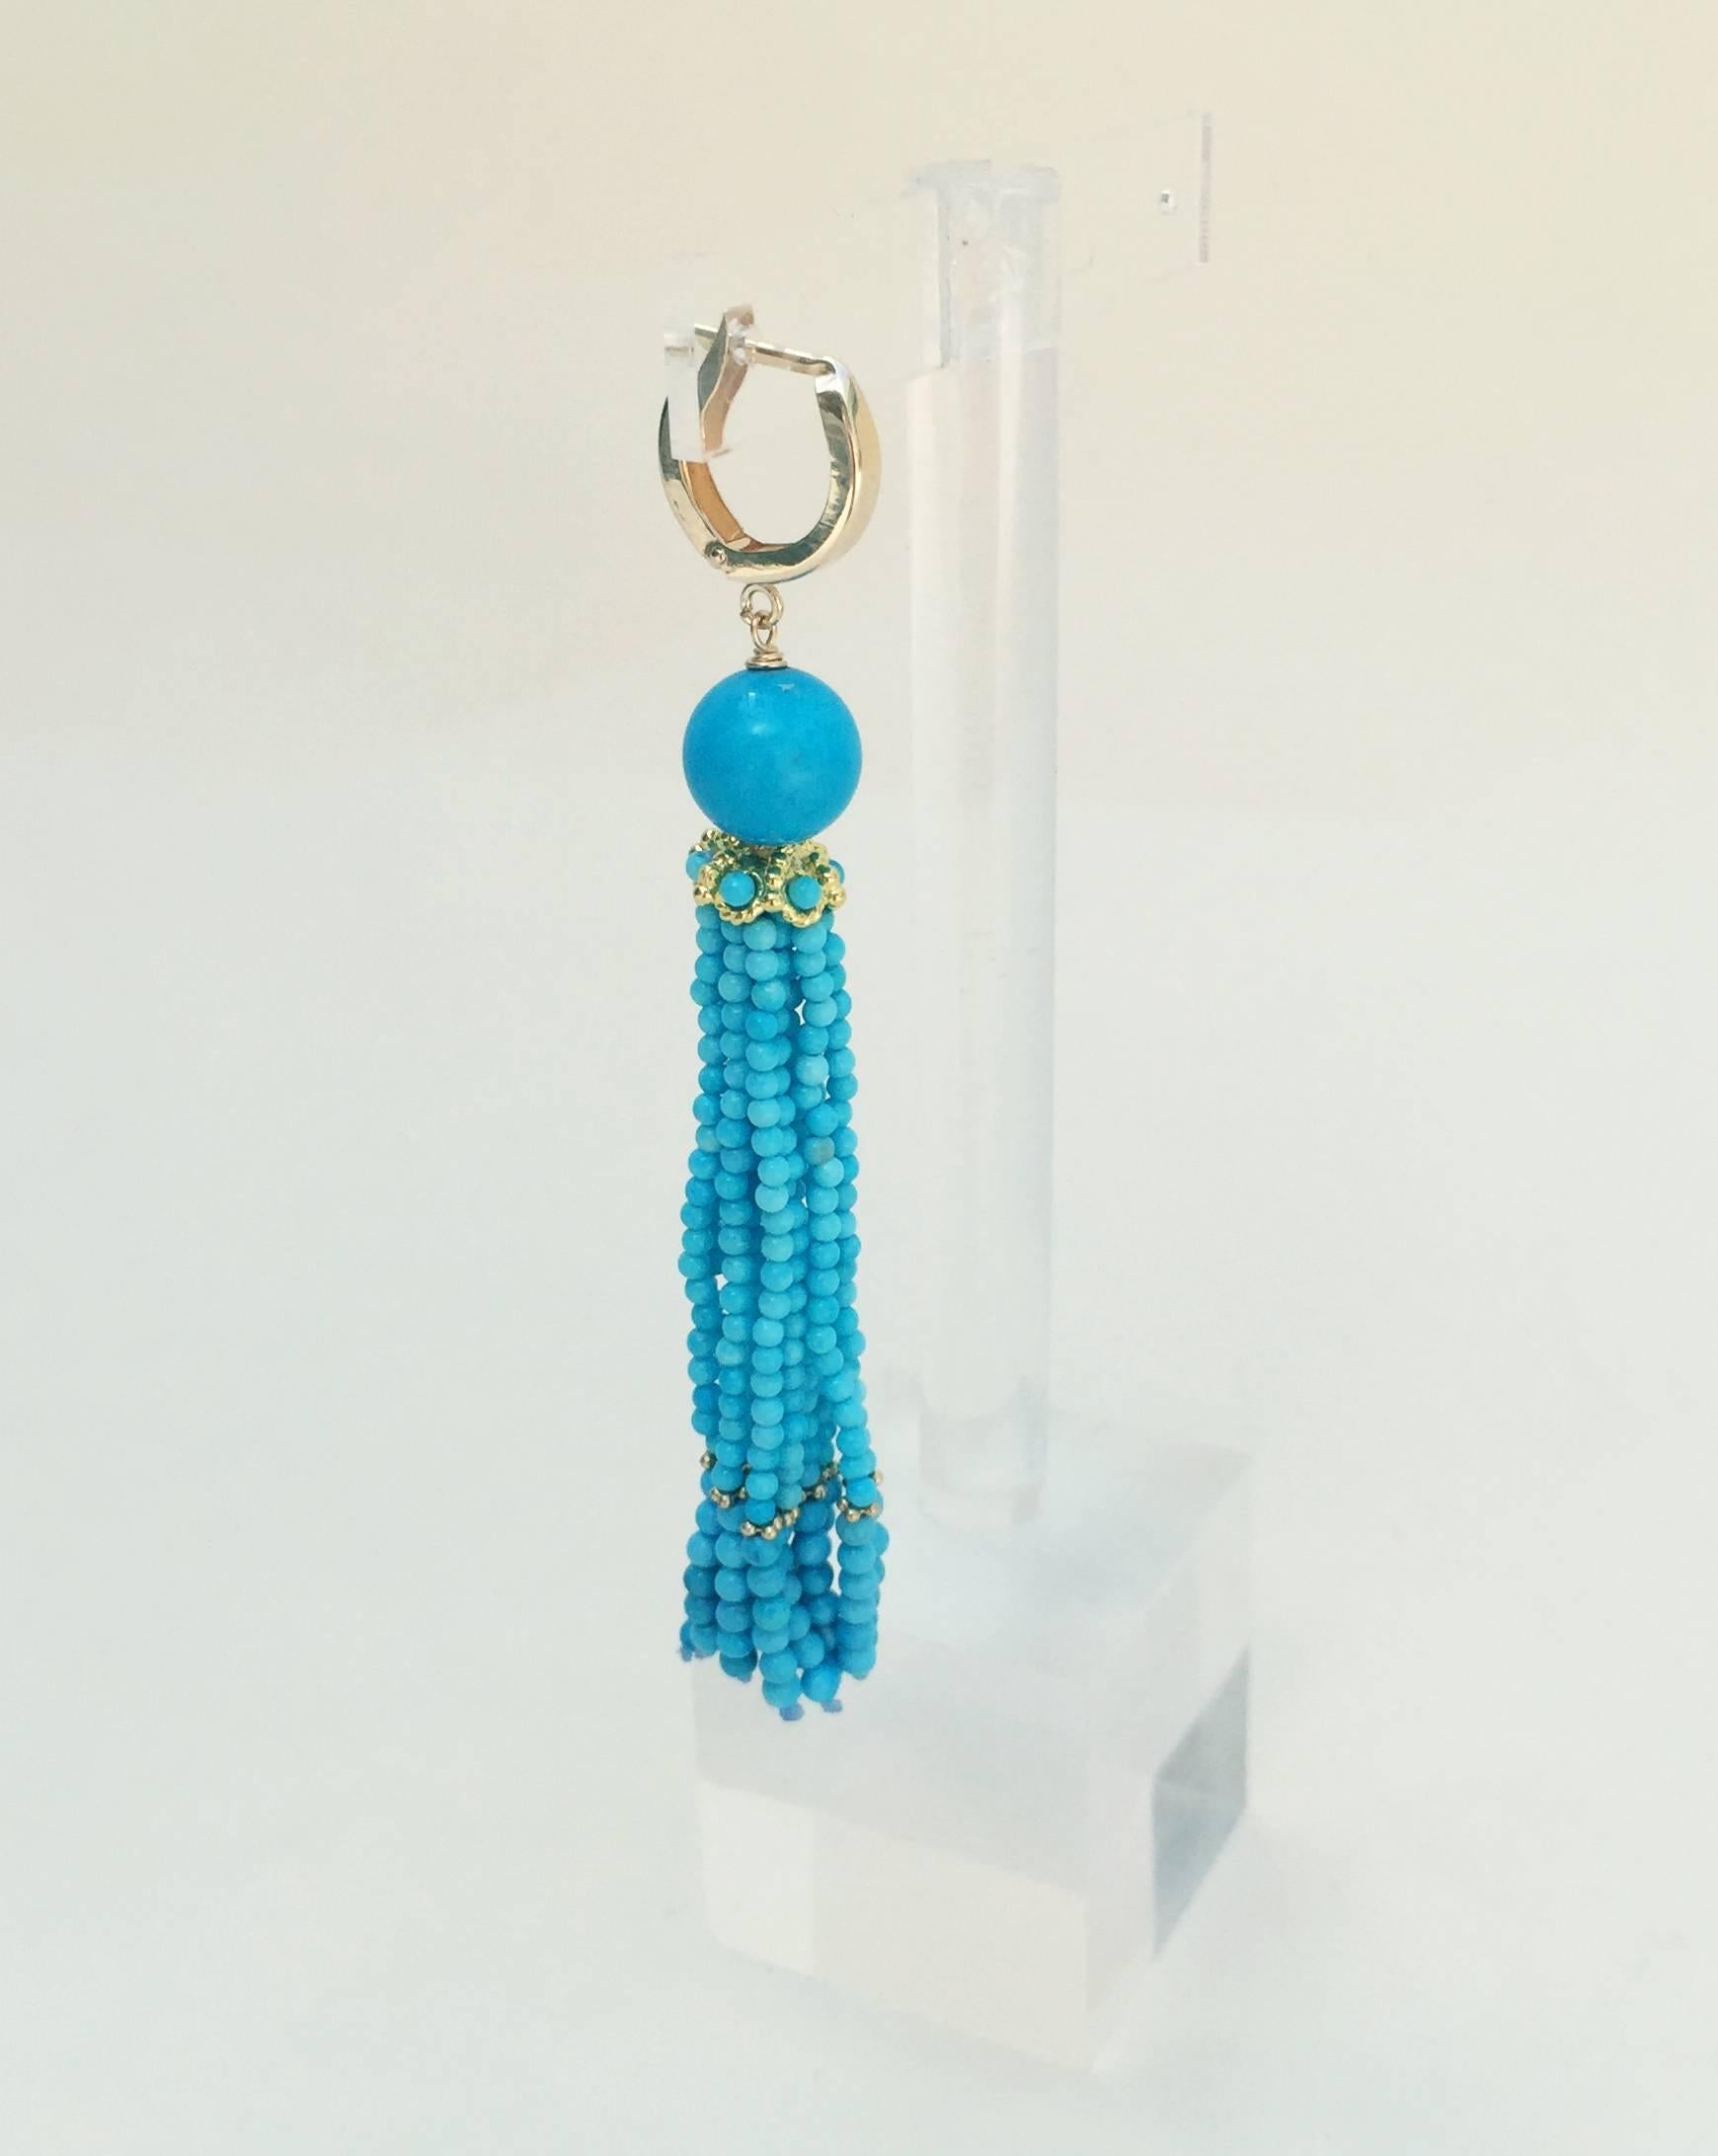 A large turquoise bead starts off these earrings followed by a gold small cup. These turquoise tassel earrings are highlighted by 14k yellow gold beads. The 14k yellow gold lever backs accentuates the elegance and brilliant blue turquoise earrings. 